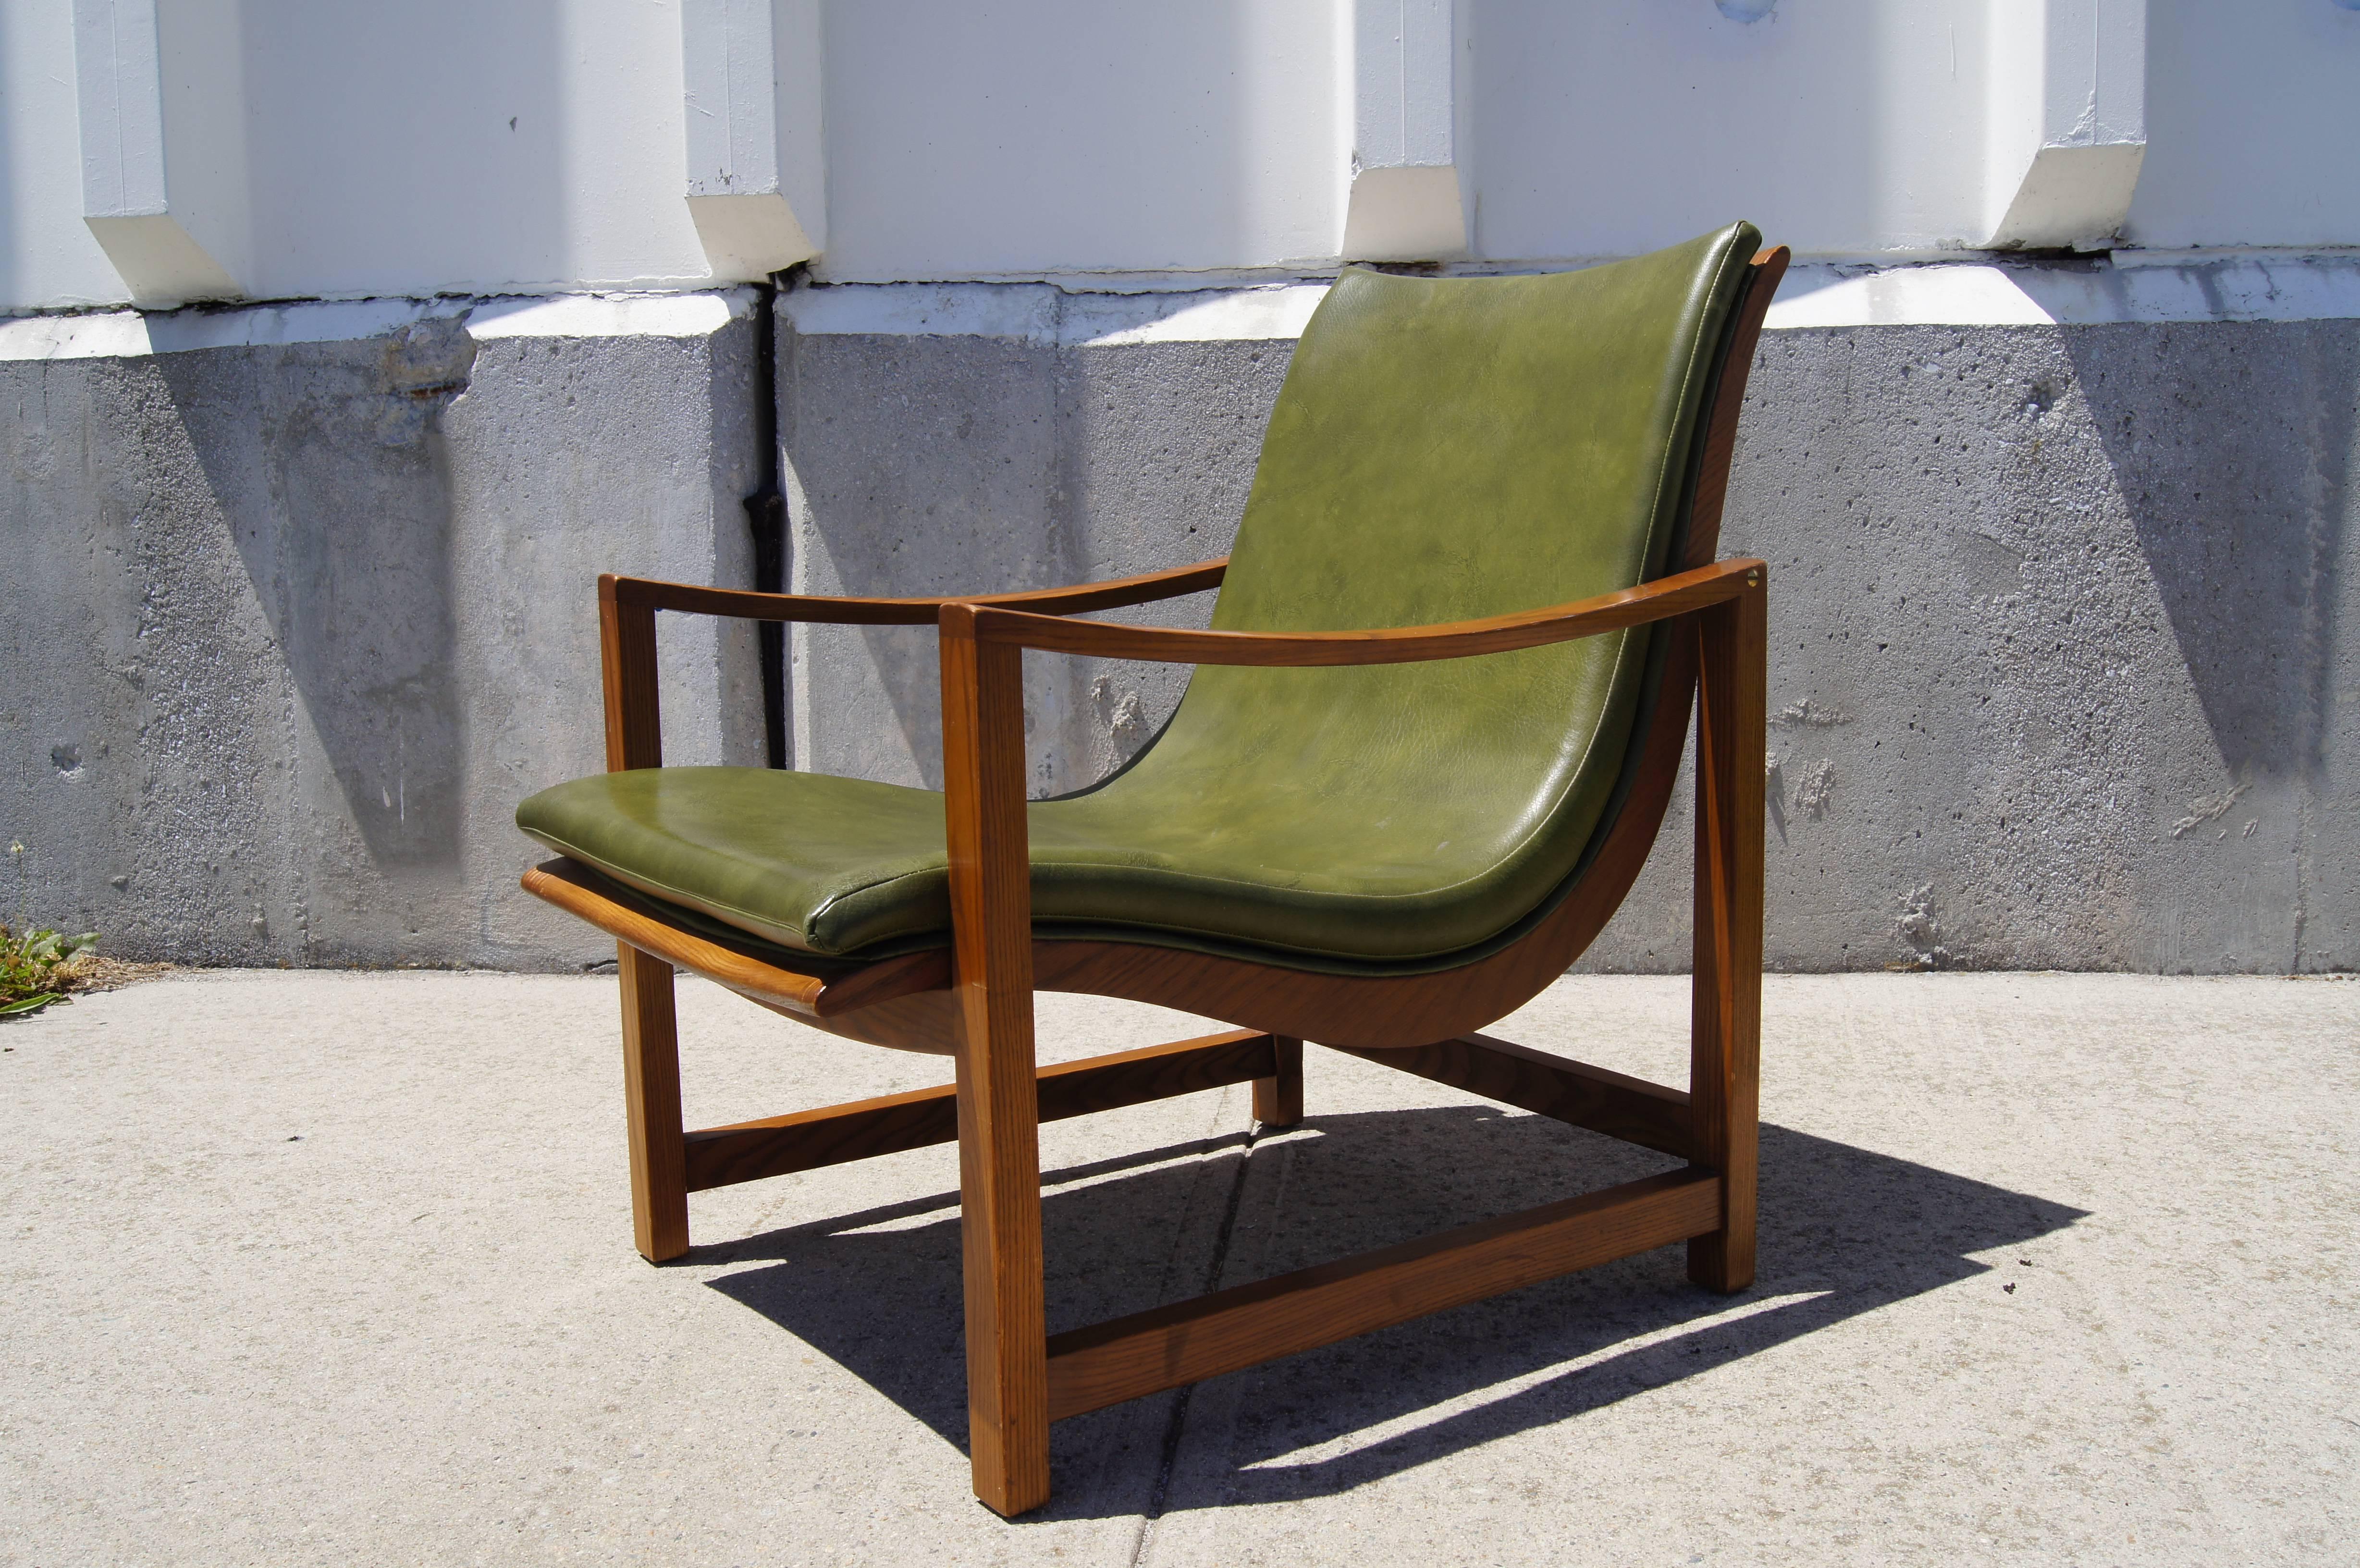 This rarely seen lounge chair, designed by Edward Wormley for Dunbar, sets a green leather-embossed vinyl sling seat into an elegant frame of ash that opposes a rectilinear base with curved arms.